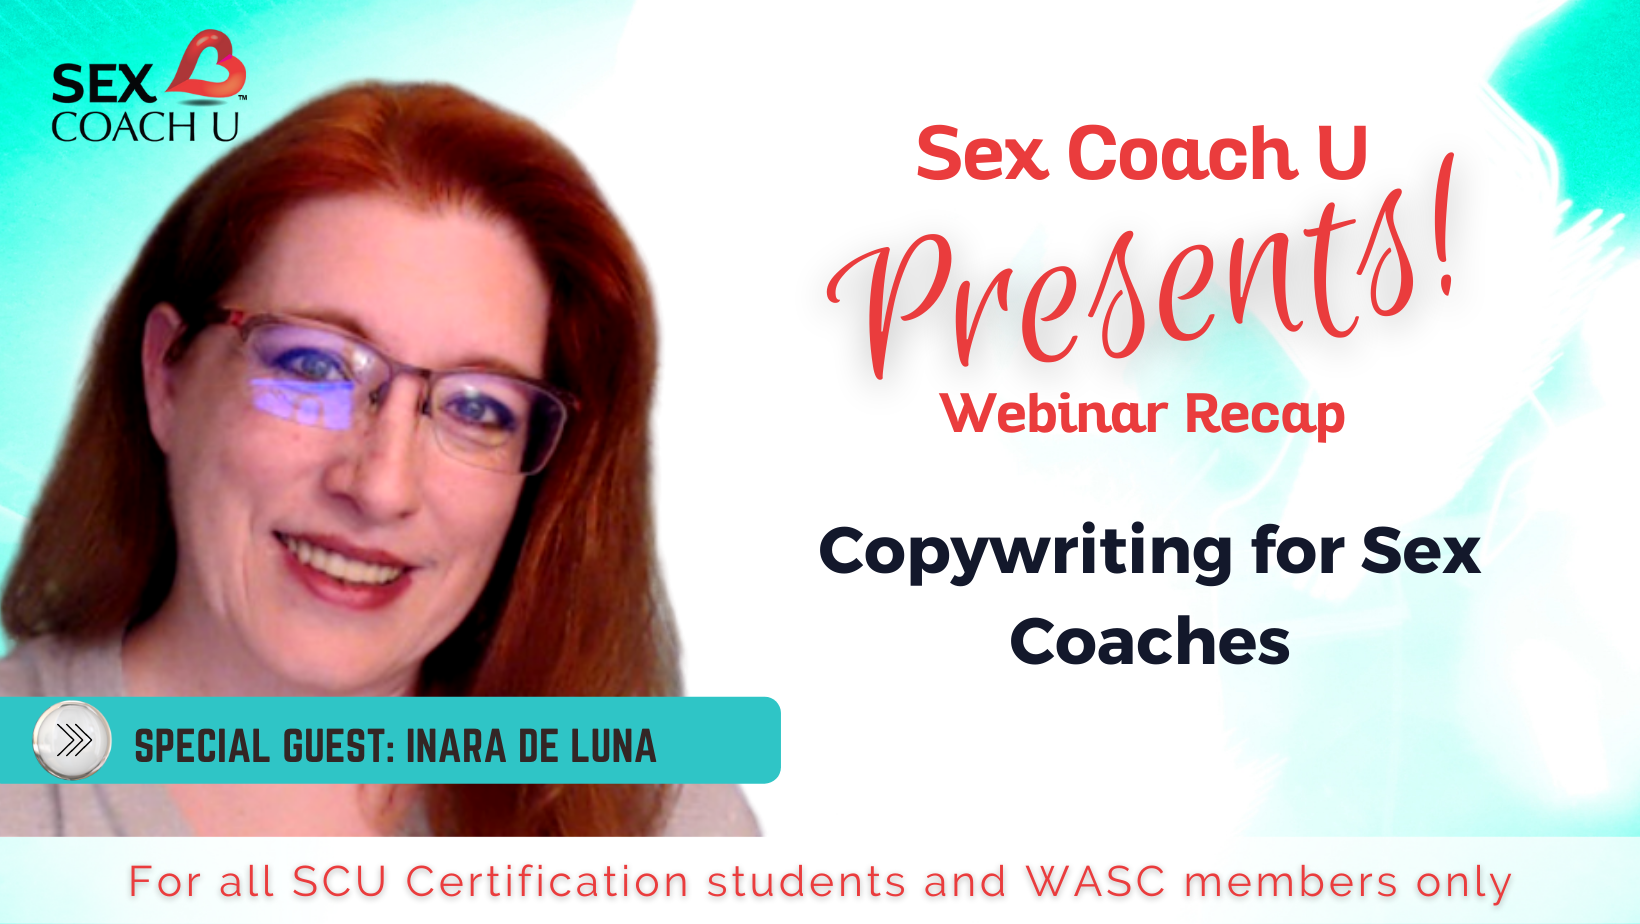 graphic depicting the webinar presentation about copywriting for sex coaches